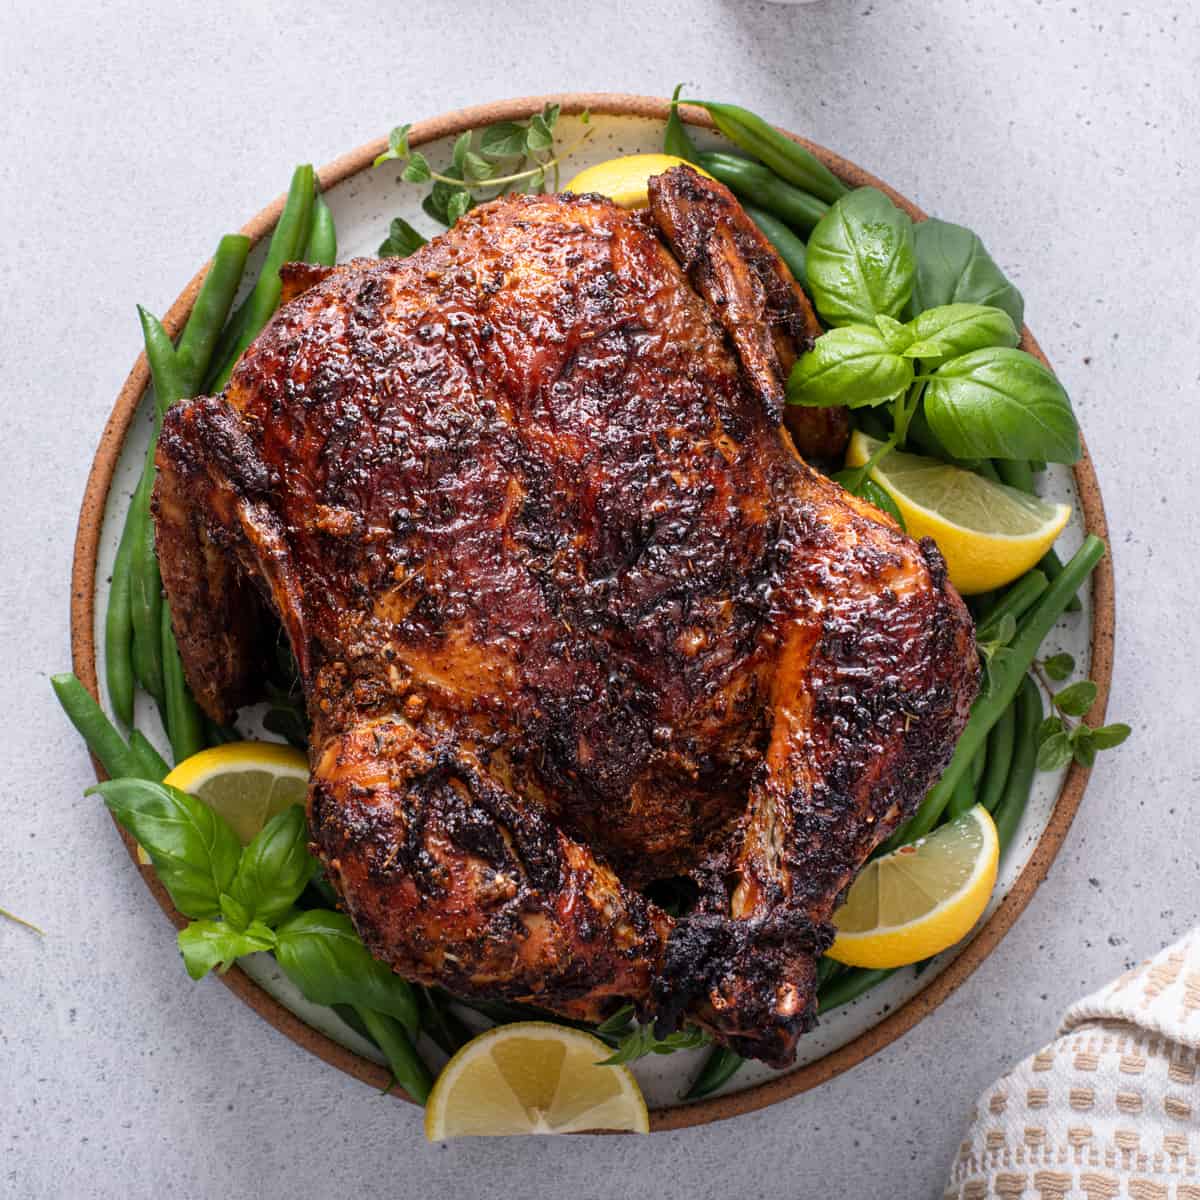 Ninja Dual Zone Air Fryer Whole Chicken -   Air fryer recipes whole  chicken, Air fryer recipes chicken, Ninja cooking system recipes